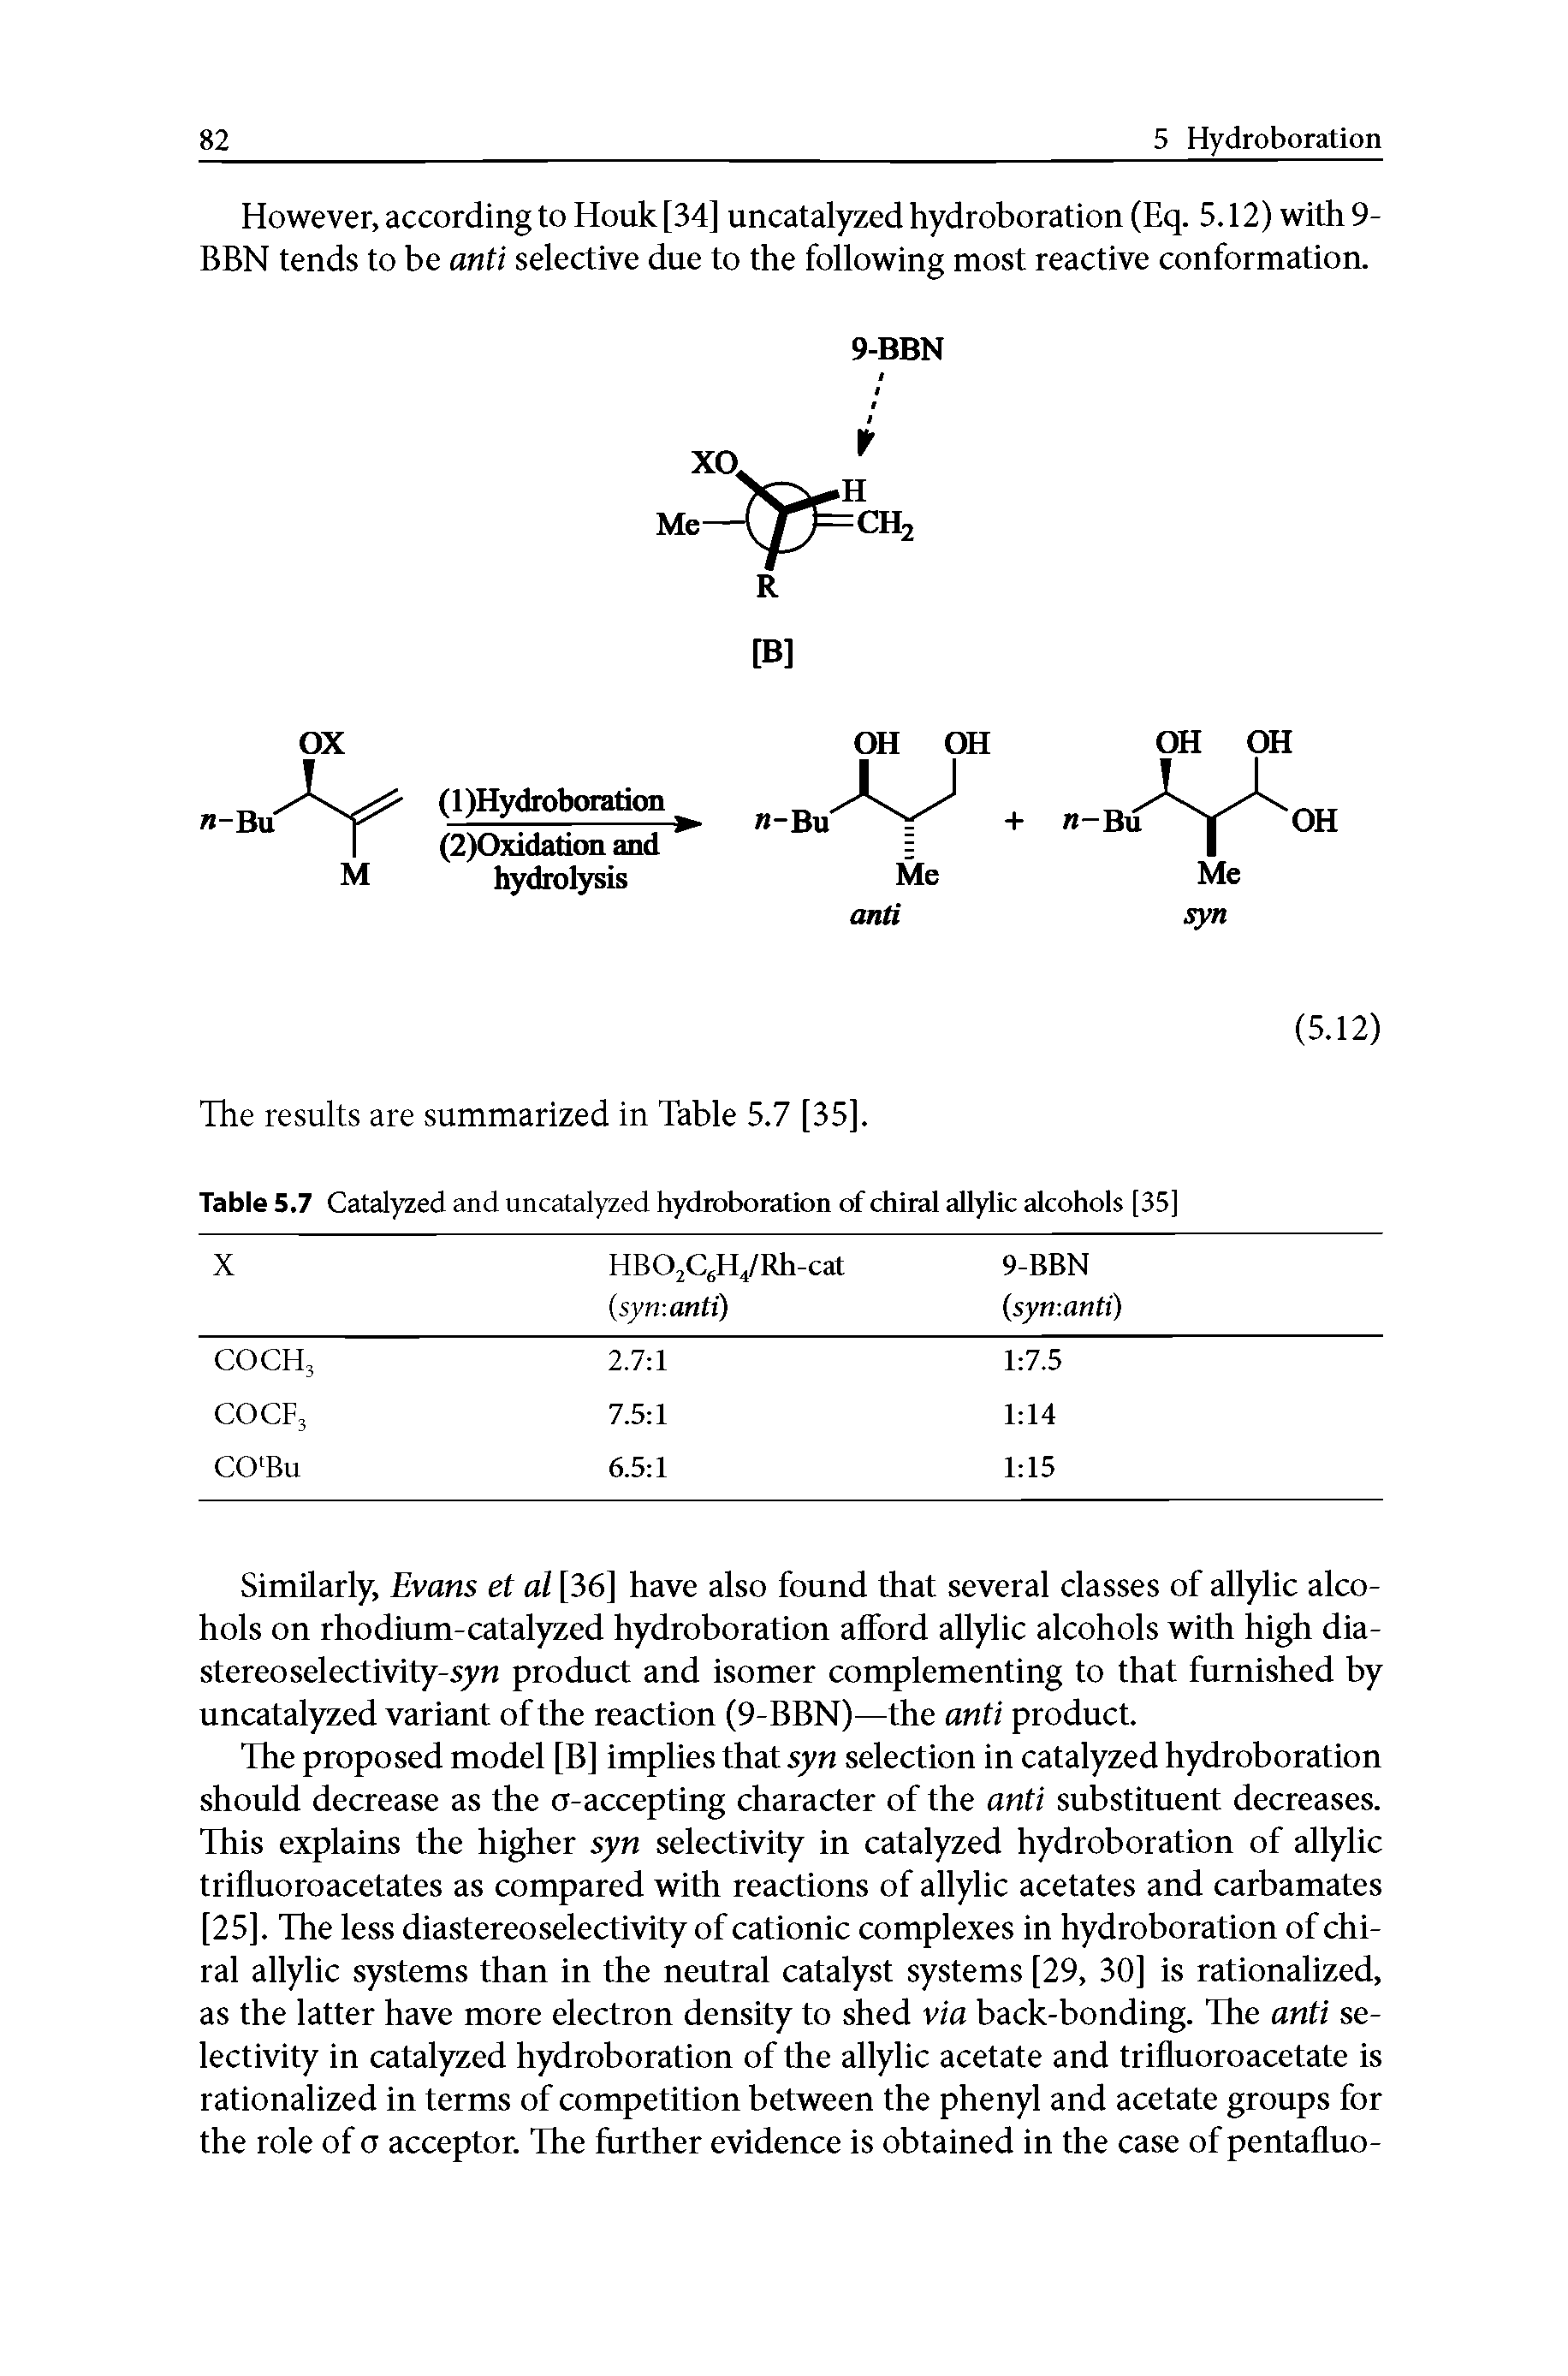 Table 5.7 Catalyzed and uncatalyzed hydroboration of chiral allylic alcohols [35]...